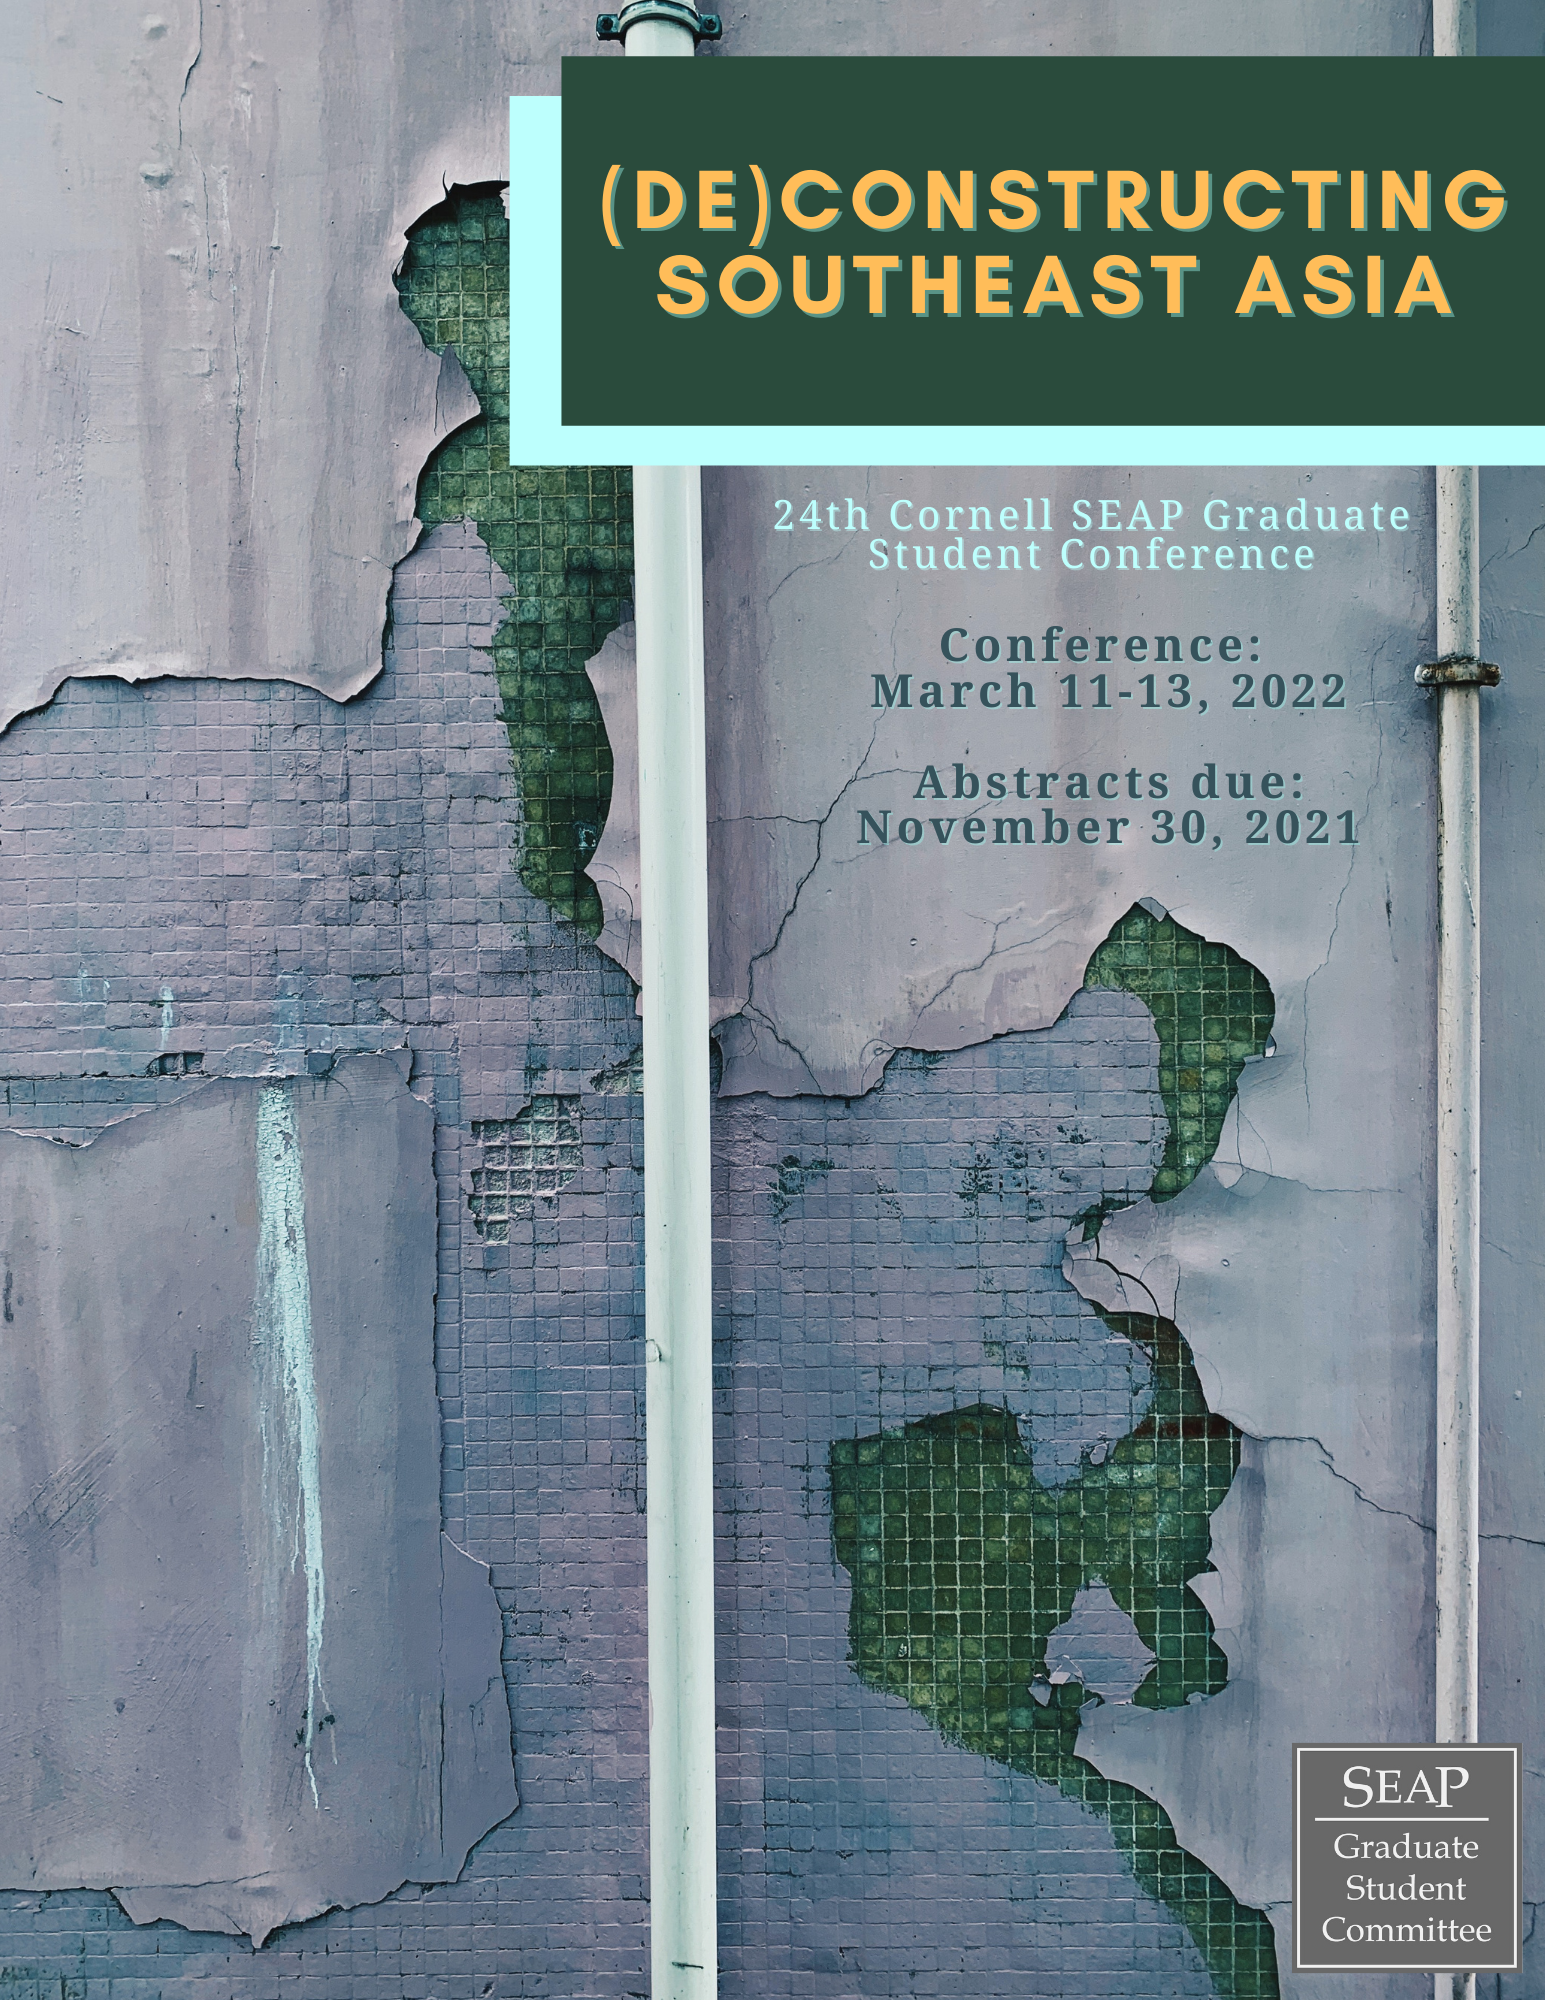 A picture of a decaying plastered wall, with the text "(De)Constructing Southeast Asia" and the dates of the conference.